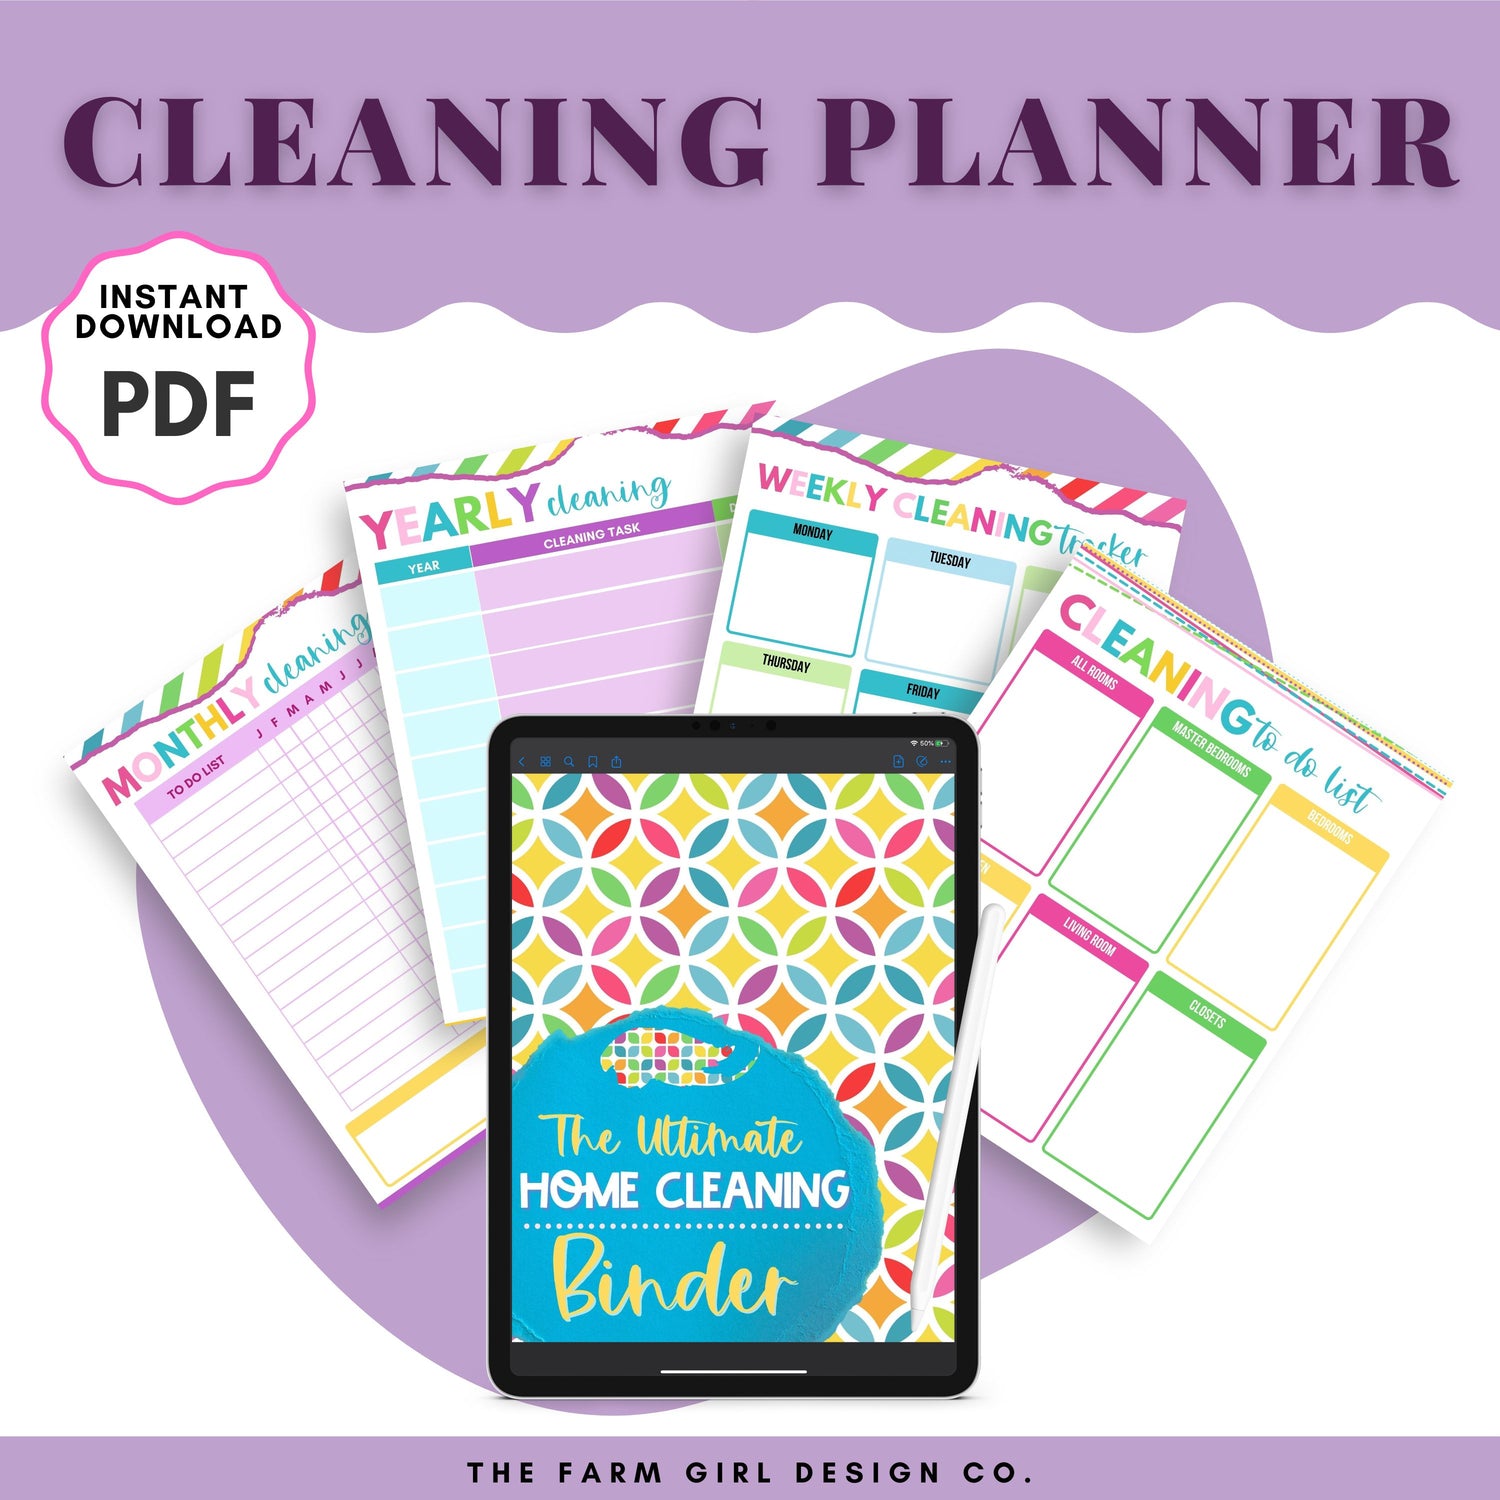 Like to keep a tidy home but need some organization help? This Ultimate Cleaning Bundle will help you stay on task with your cleaning and home improvement projects. Printable Cleaning checklists are a great way to keep yourself organized. Download and print out this Cleaning Binder to keep track of your cleaning tasks.